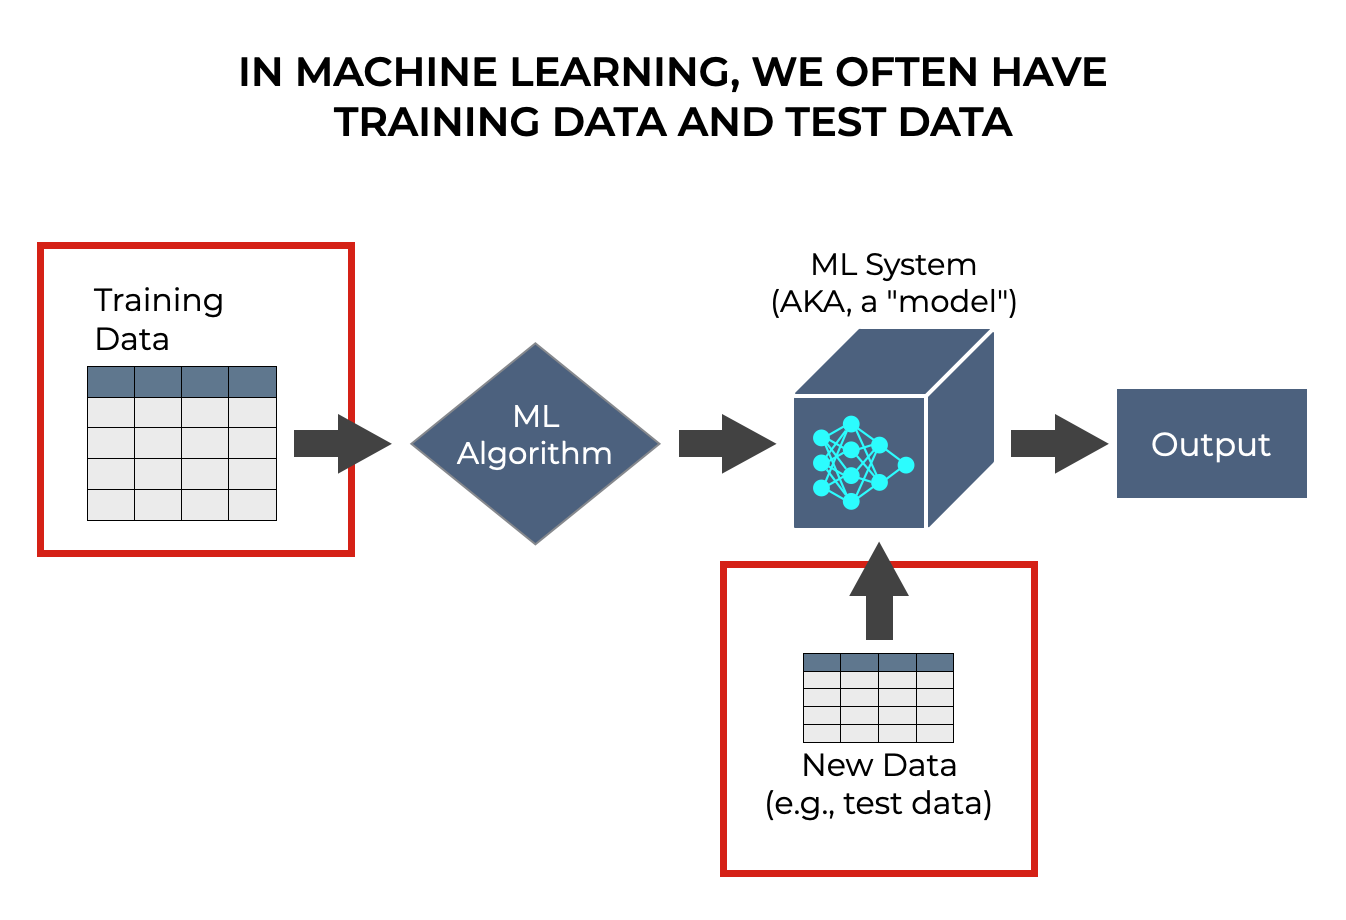 An image that shows how we use training data and "test" data in the machine learning process.